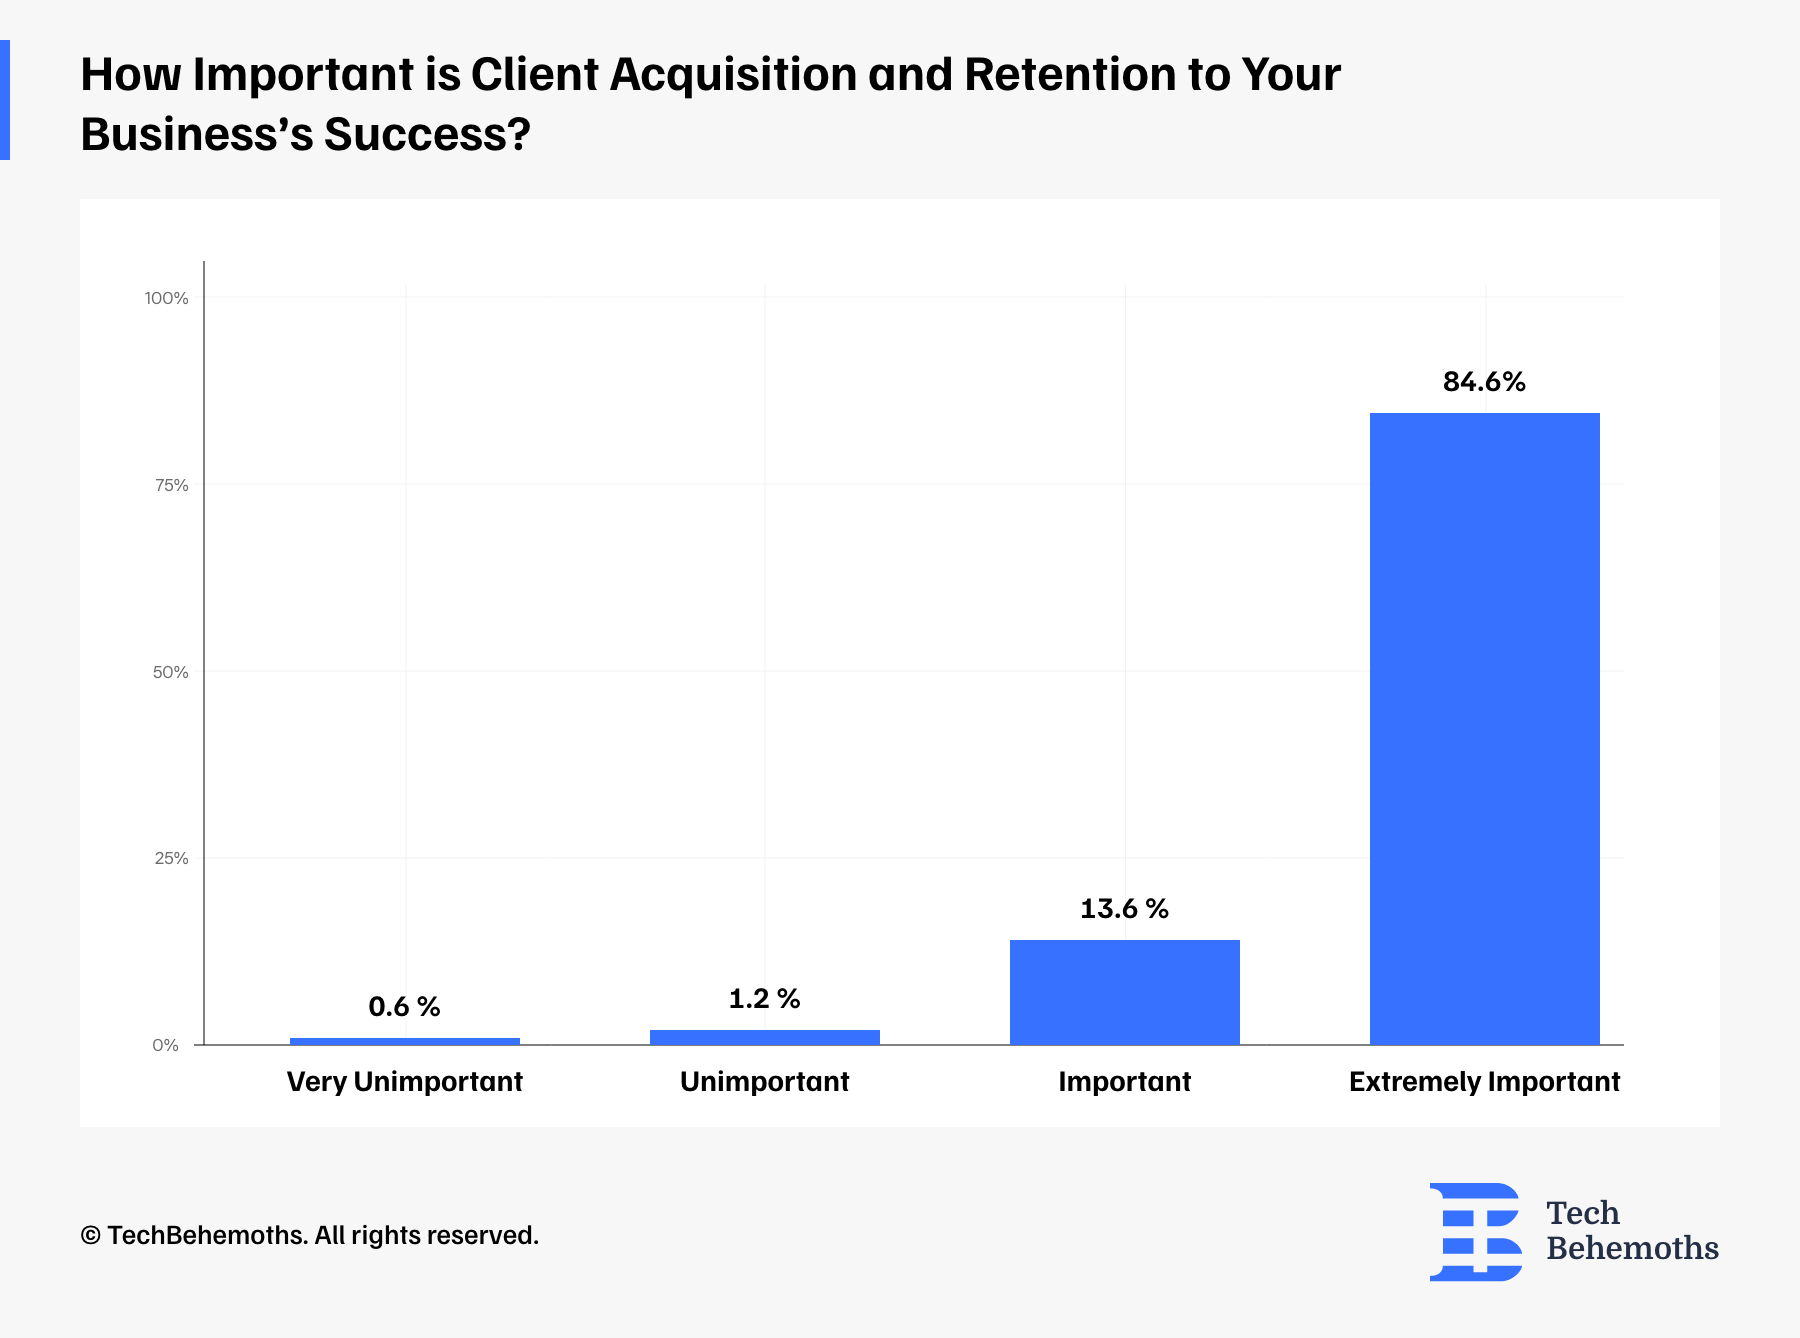 How Important is Client Acquisition and Retention to Your Business' Scucces?